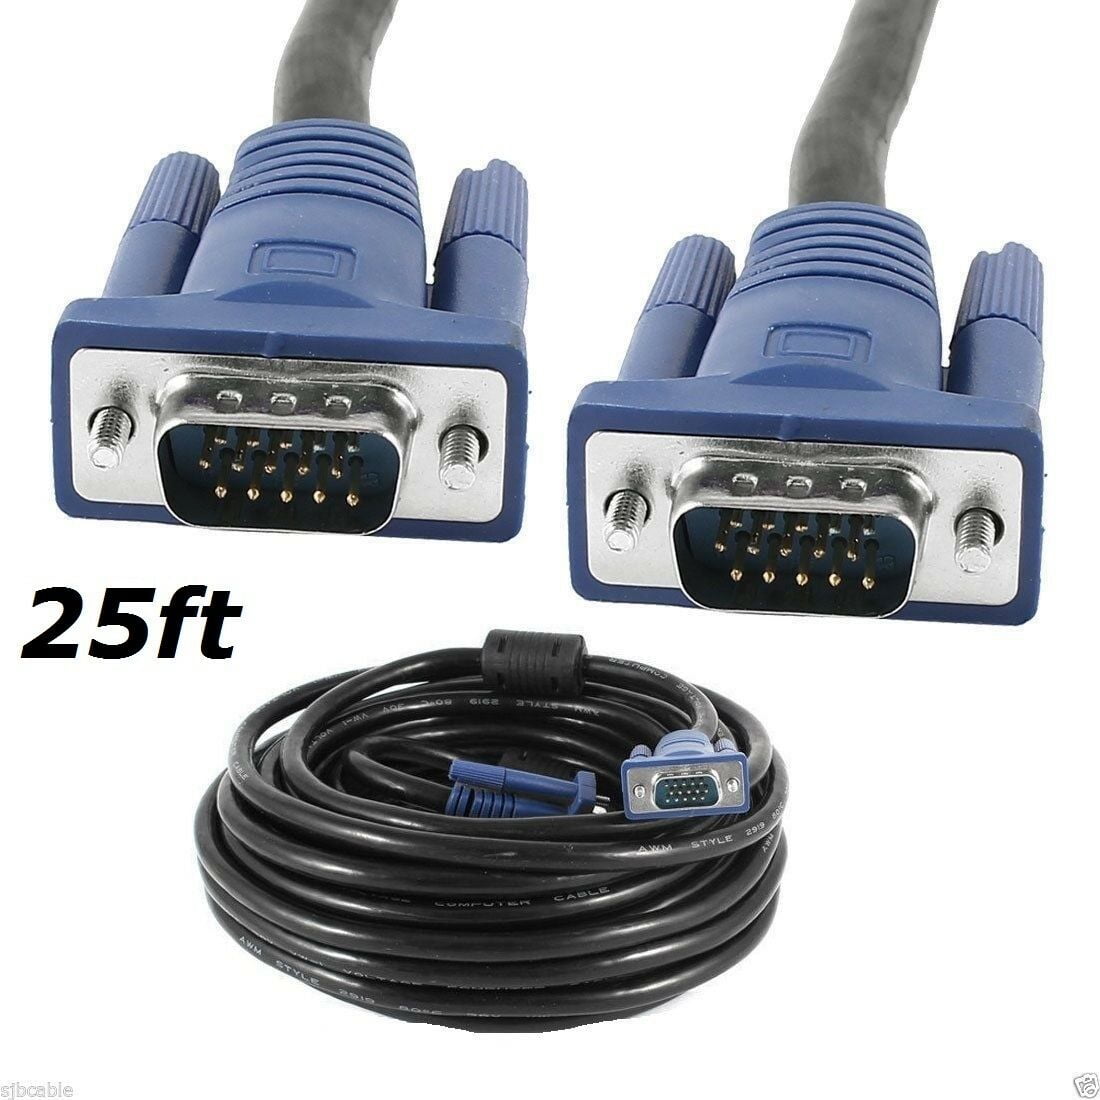 Male to Male SVGA VGA Lead cable for Computer Laptop Monitor TV LCD Video pc 